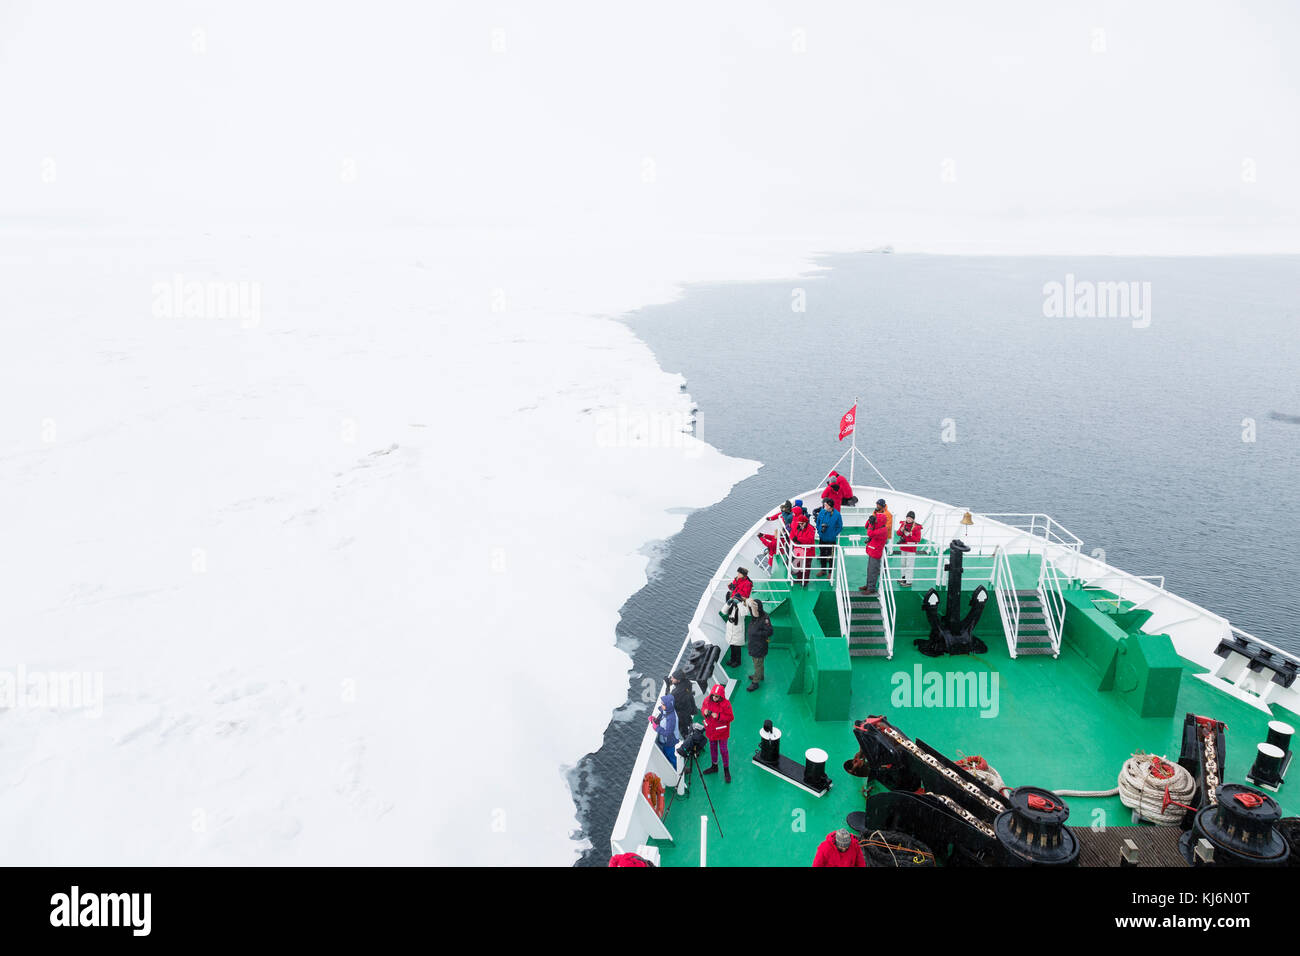 Longyearbyen, NORWAY - June 28, 2015: Expedition with a ship in the Arctic of Svalbard, Norway Stock Photo